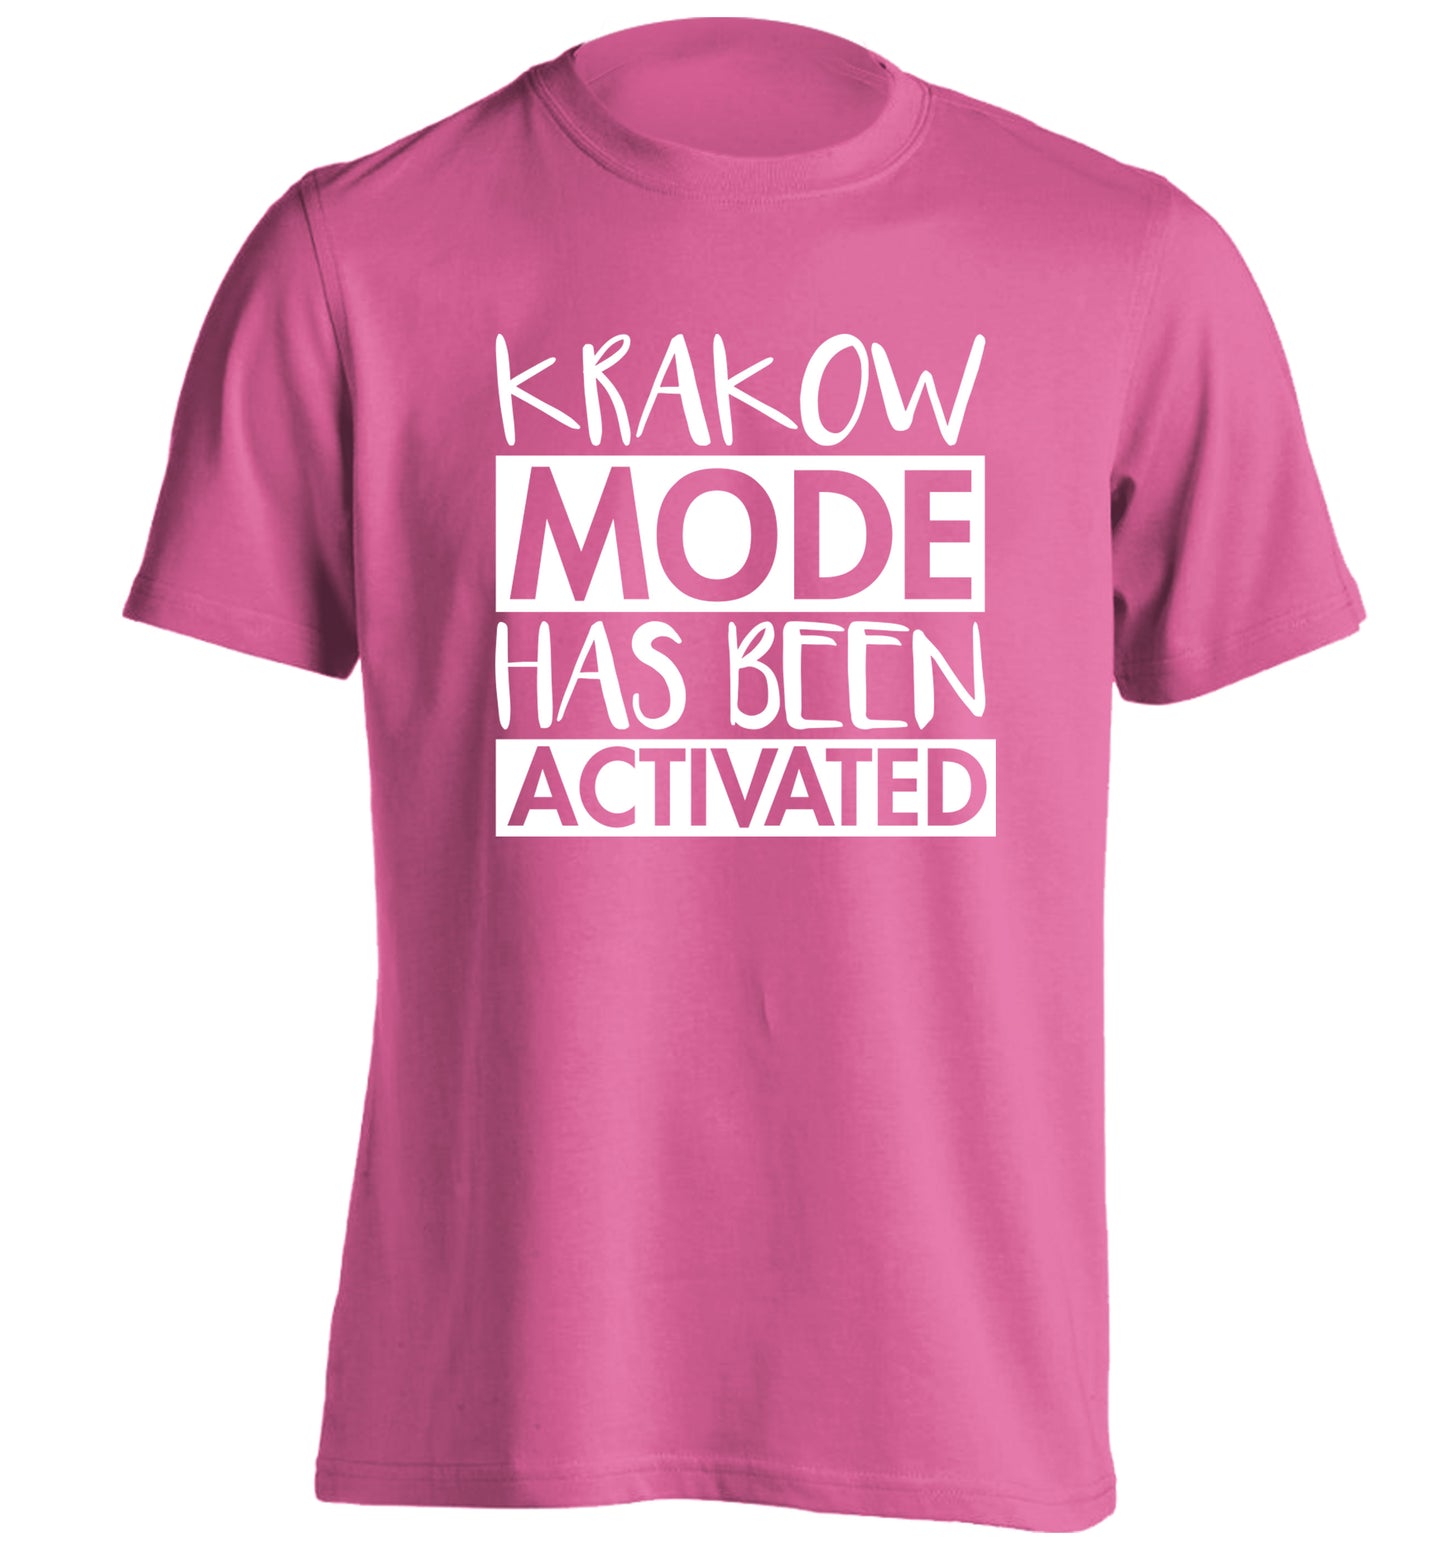 Krakow mode has been activated adults unisex pink Tshirt 2XL